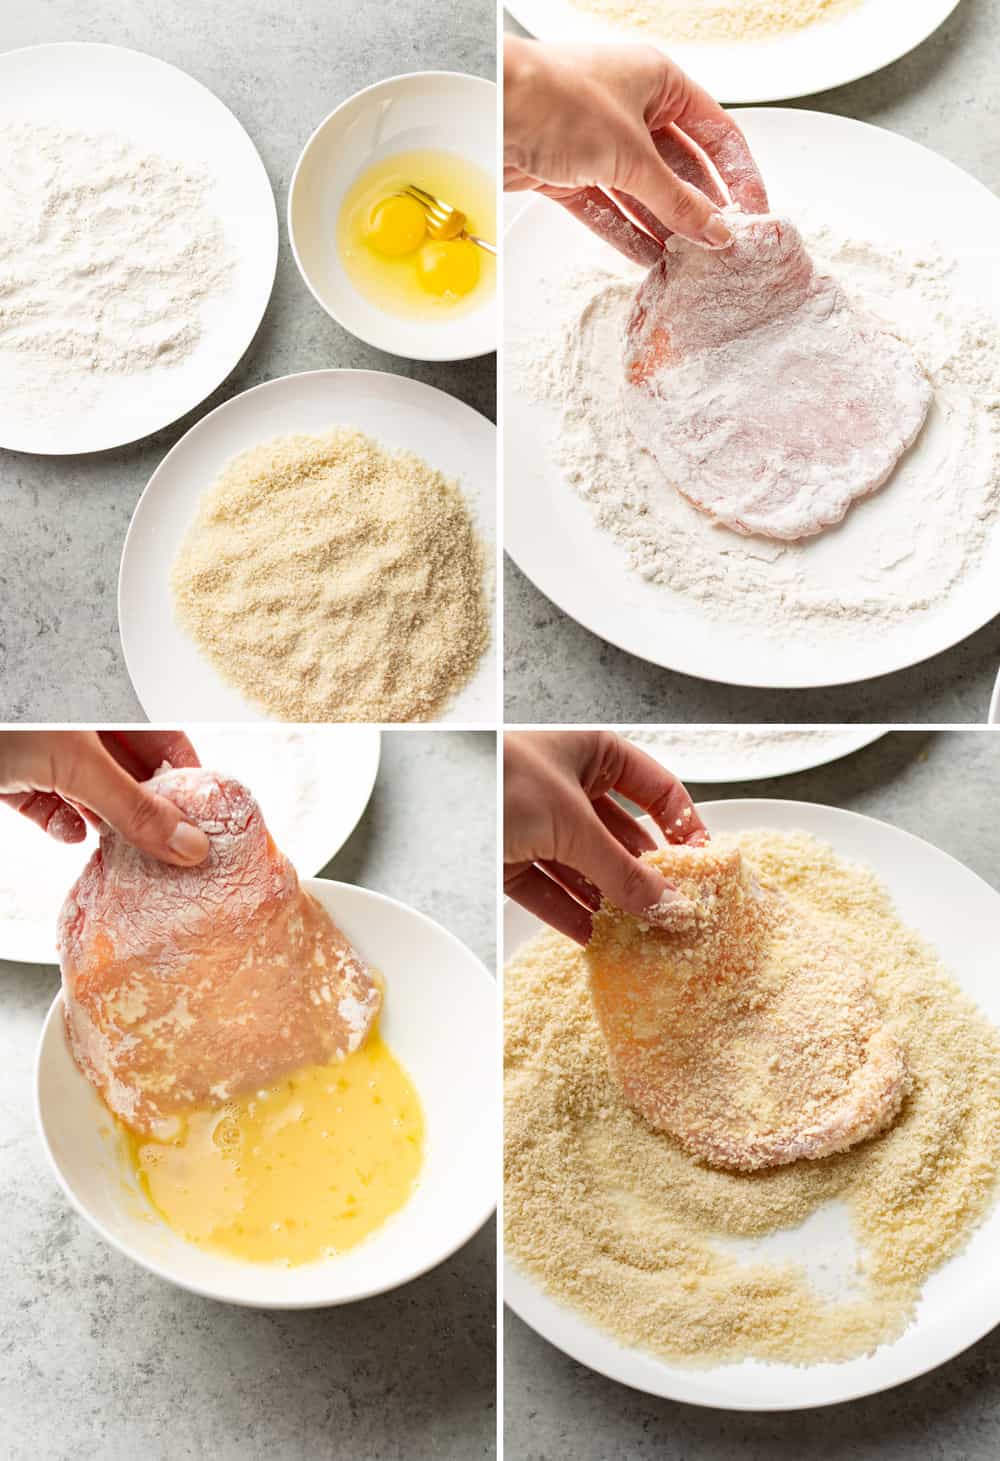 pork schnitzel process collage (dredging bowls with flour, egg, and panko breadcrumbs), then one photo for each step of dredging process